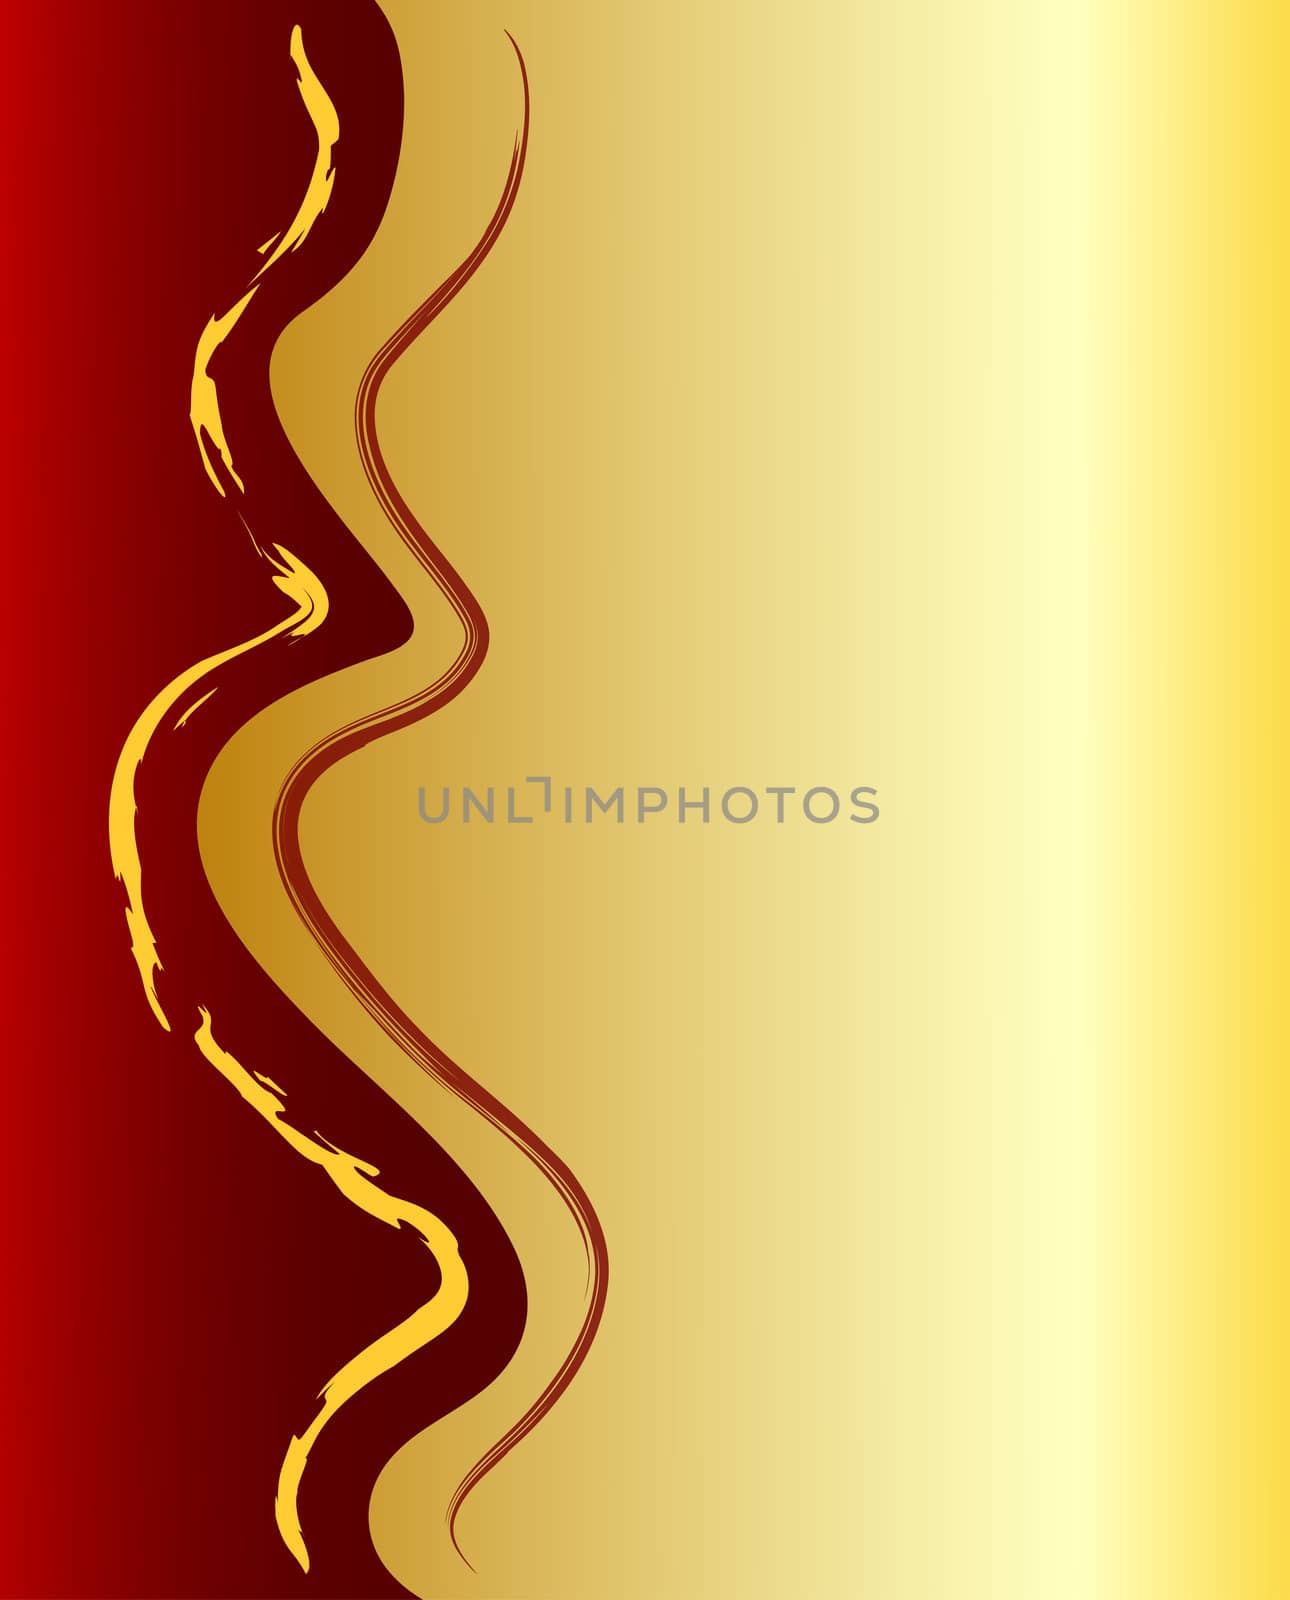 illustration of a golden abstract decoration background by peromarketing